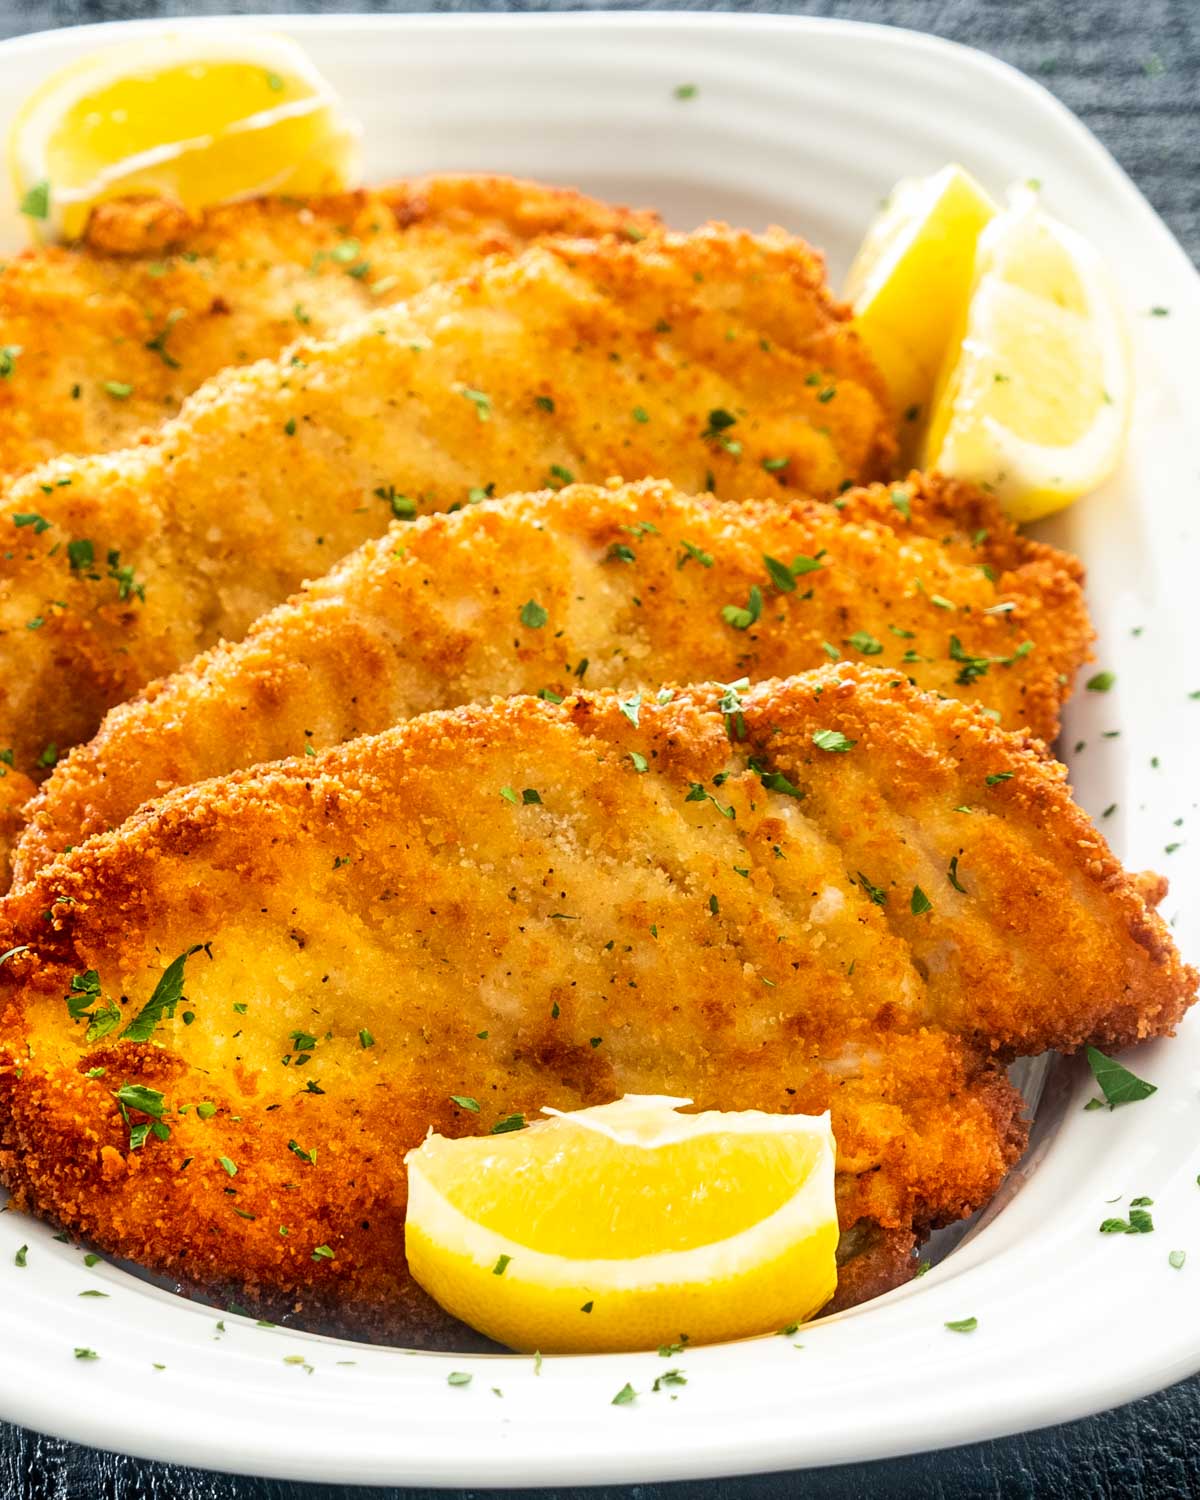 freshly made chicken schnitzel on a platter with lemon wedges.